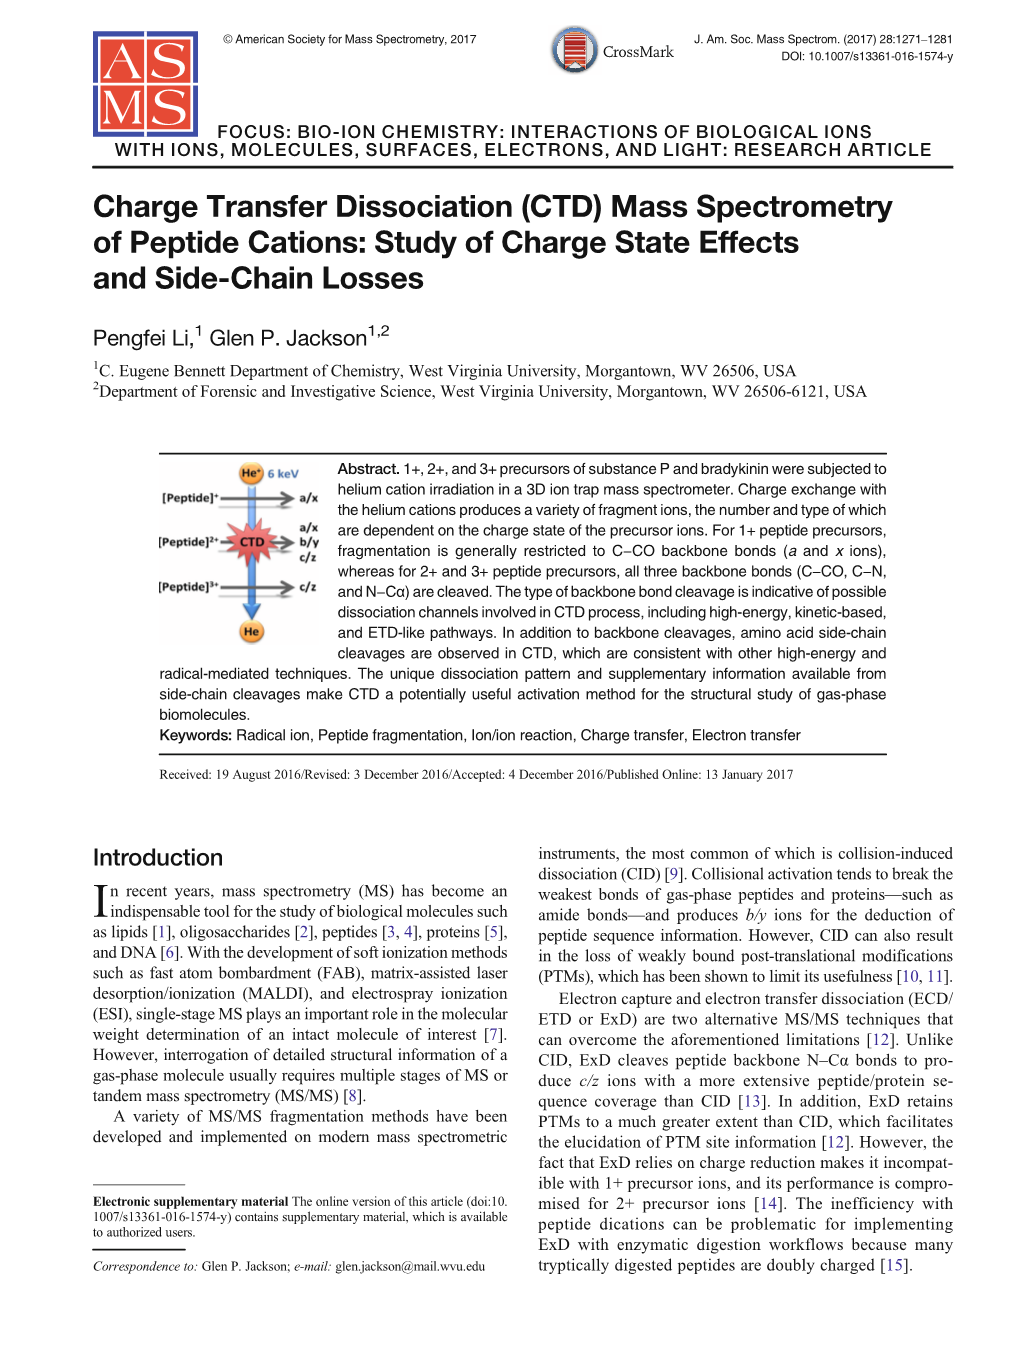 Charge Transfer Dissociation (CTD) Mass Spectrometry of Peptide Cations: Study of Charge State Effects and Side-Chain Losses